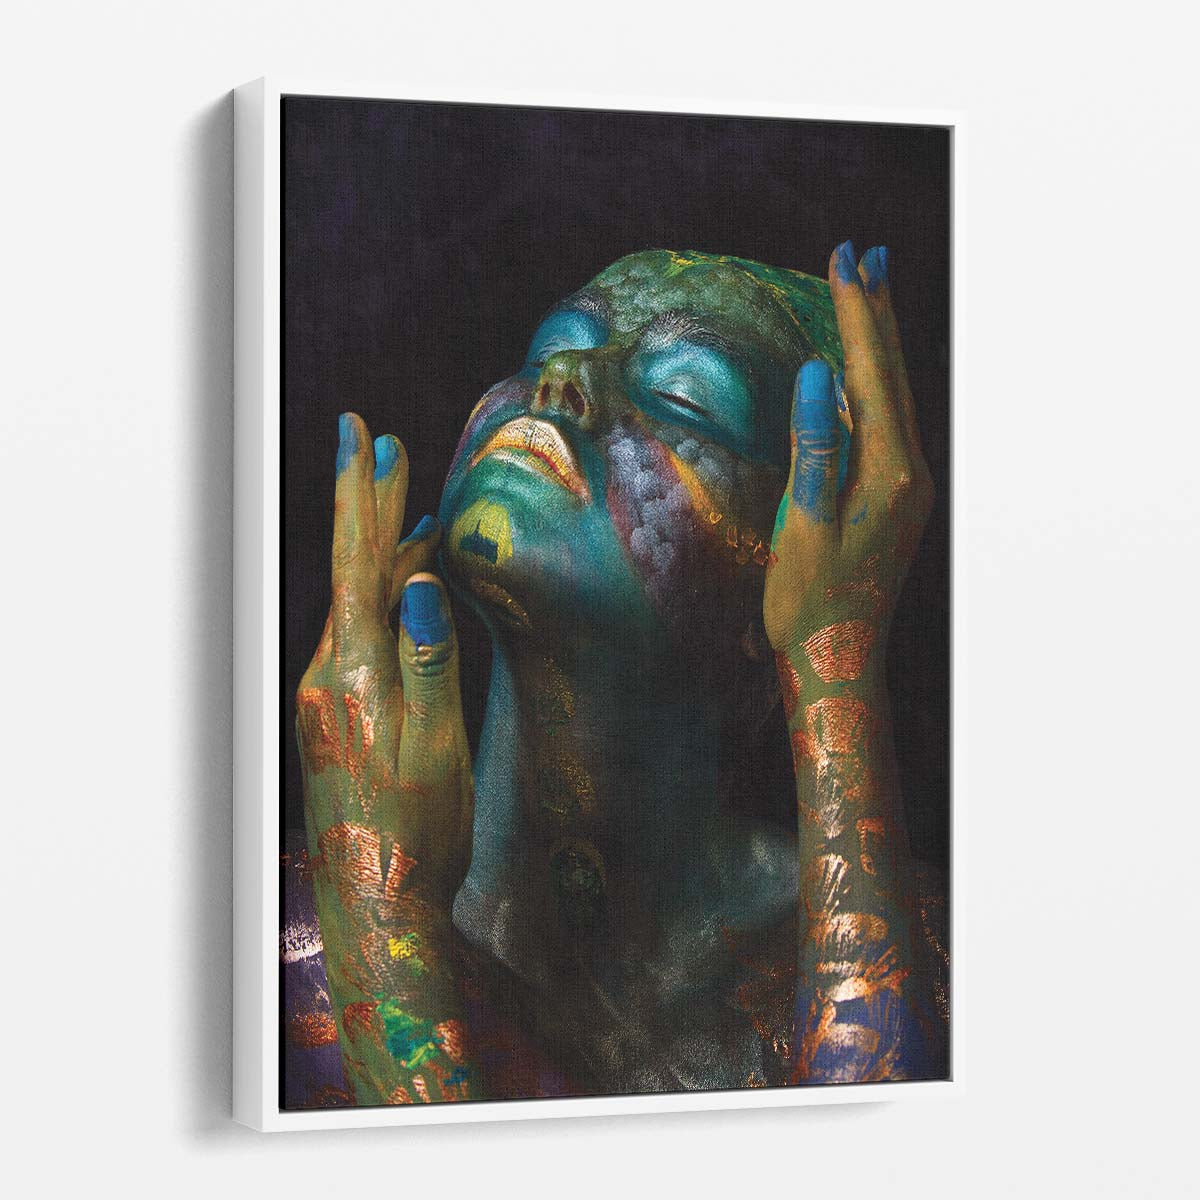 Dark Green Oil-Painted Woman Portrait Photography Art by Luxuriance Designs, made in USA